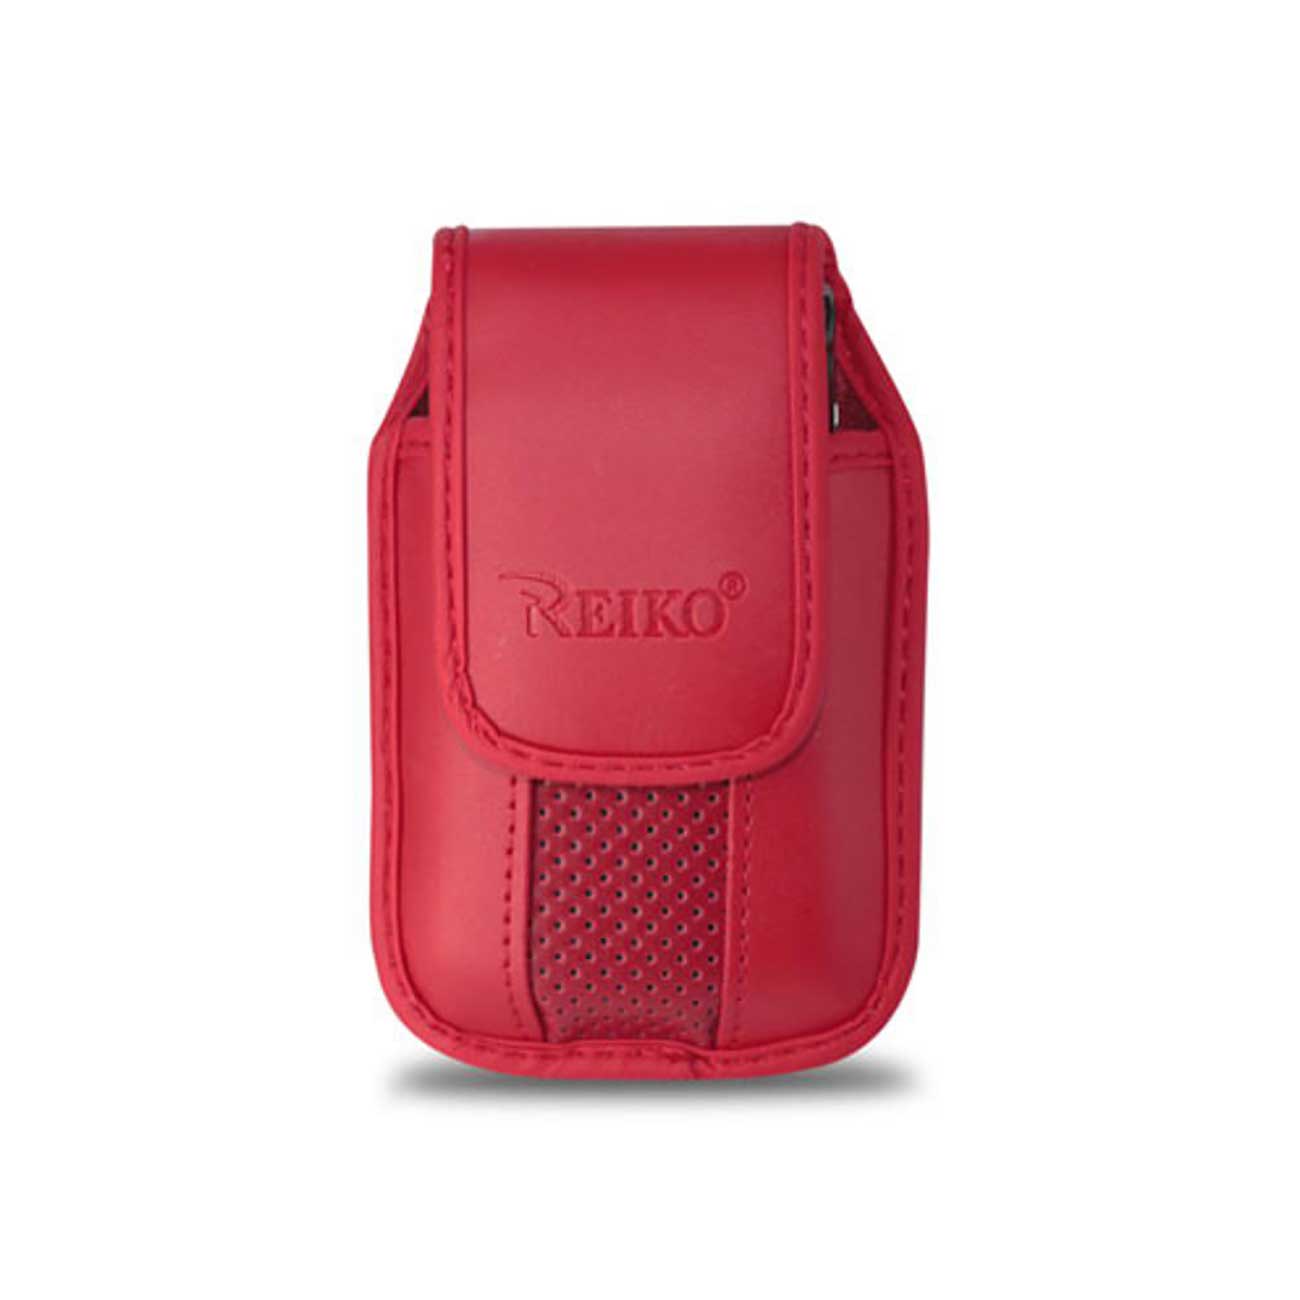 Pouch/ Phone Holster Vertical Vp11A Motolola V3 4X0.5X2.1 Inches Red Color